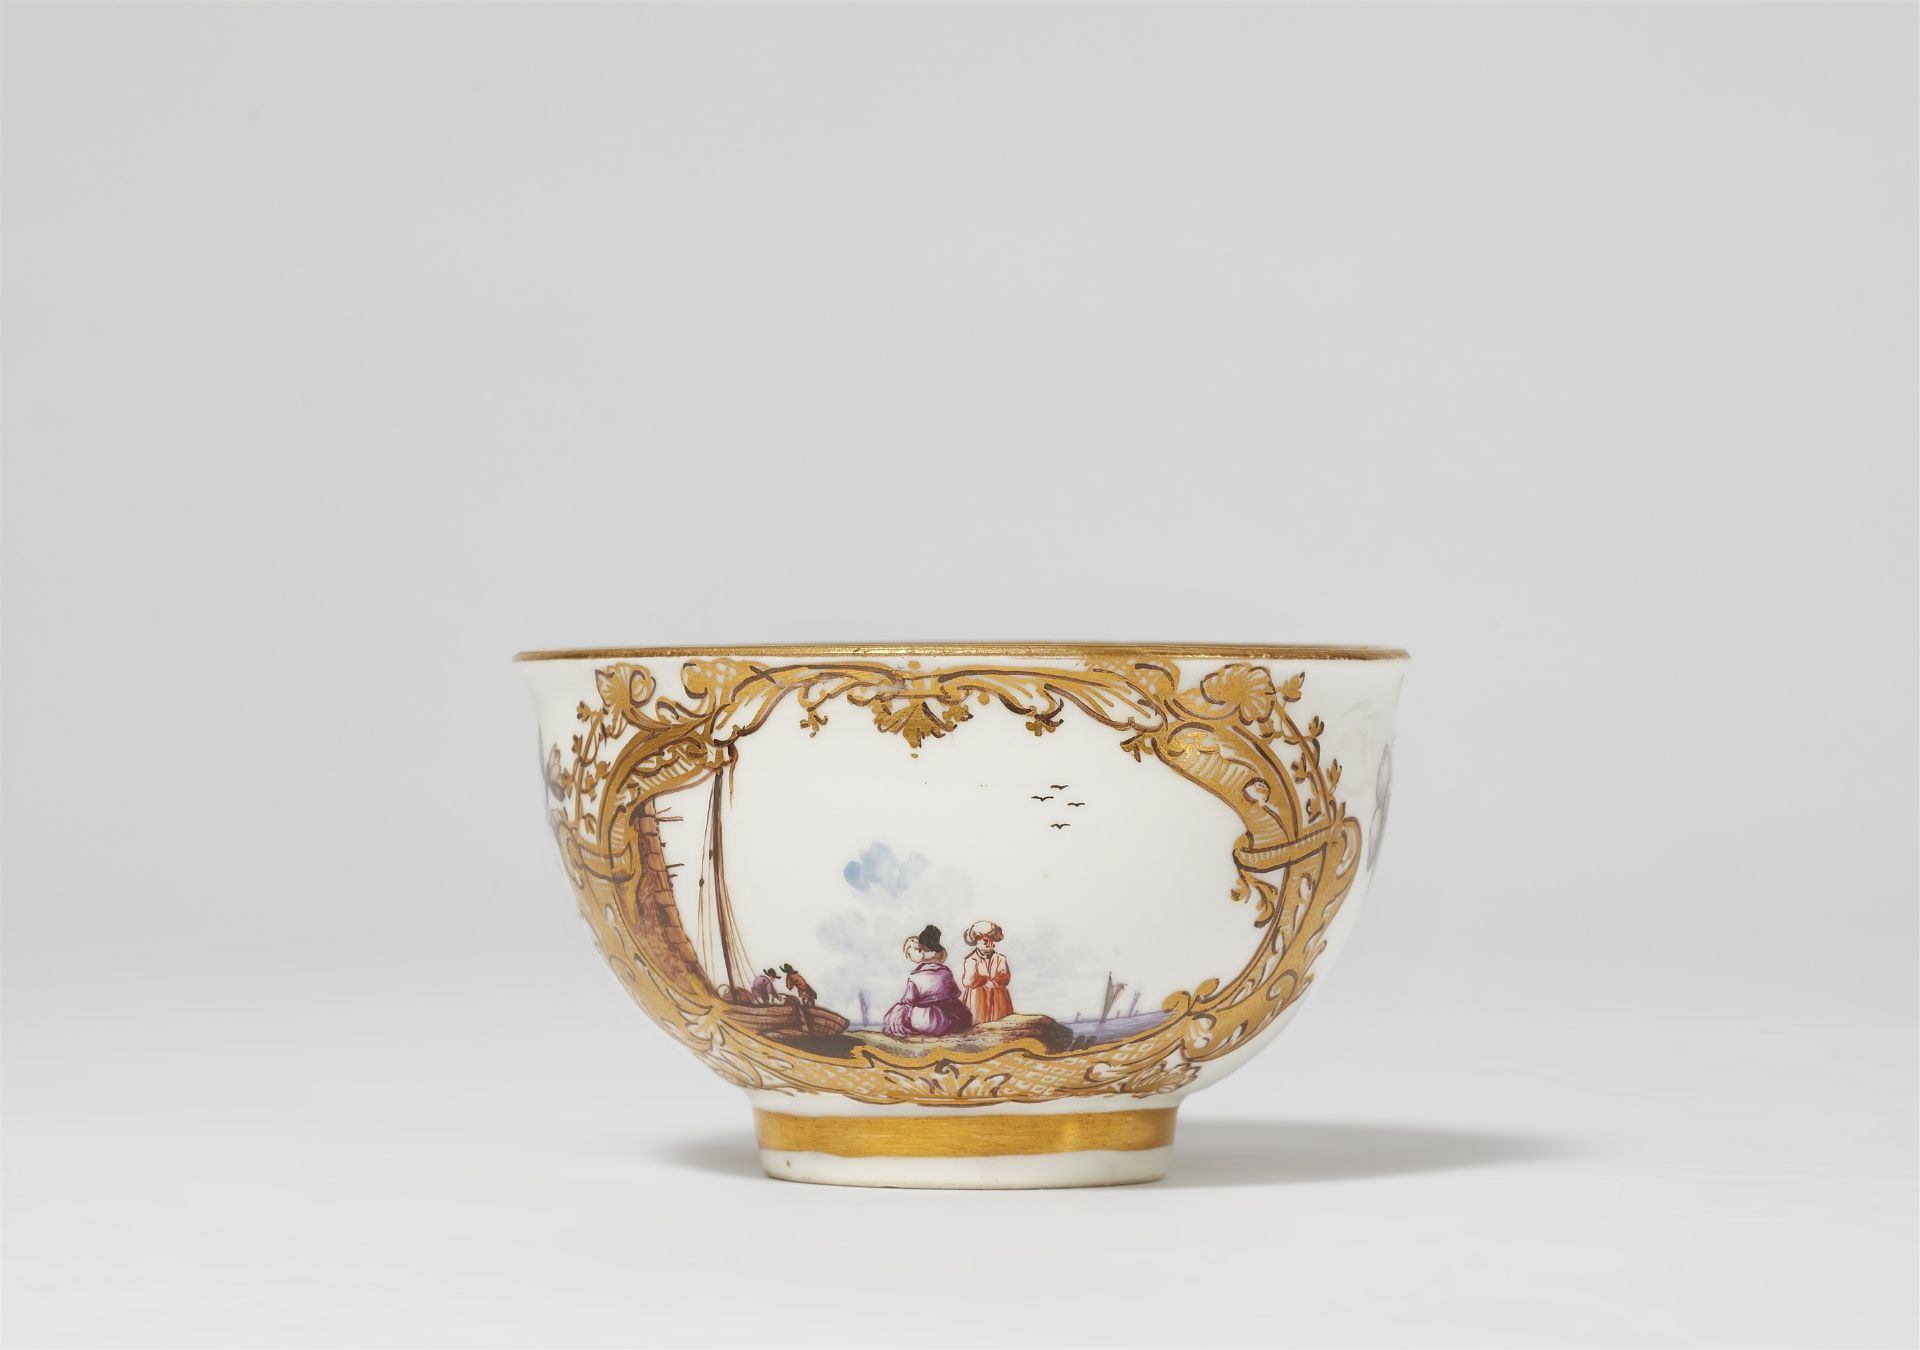 A Meissen porcelain tea bowl and saucer with merchant navy scenes - Image 2 of 4